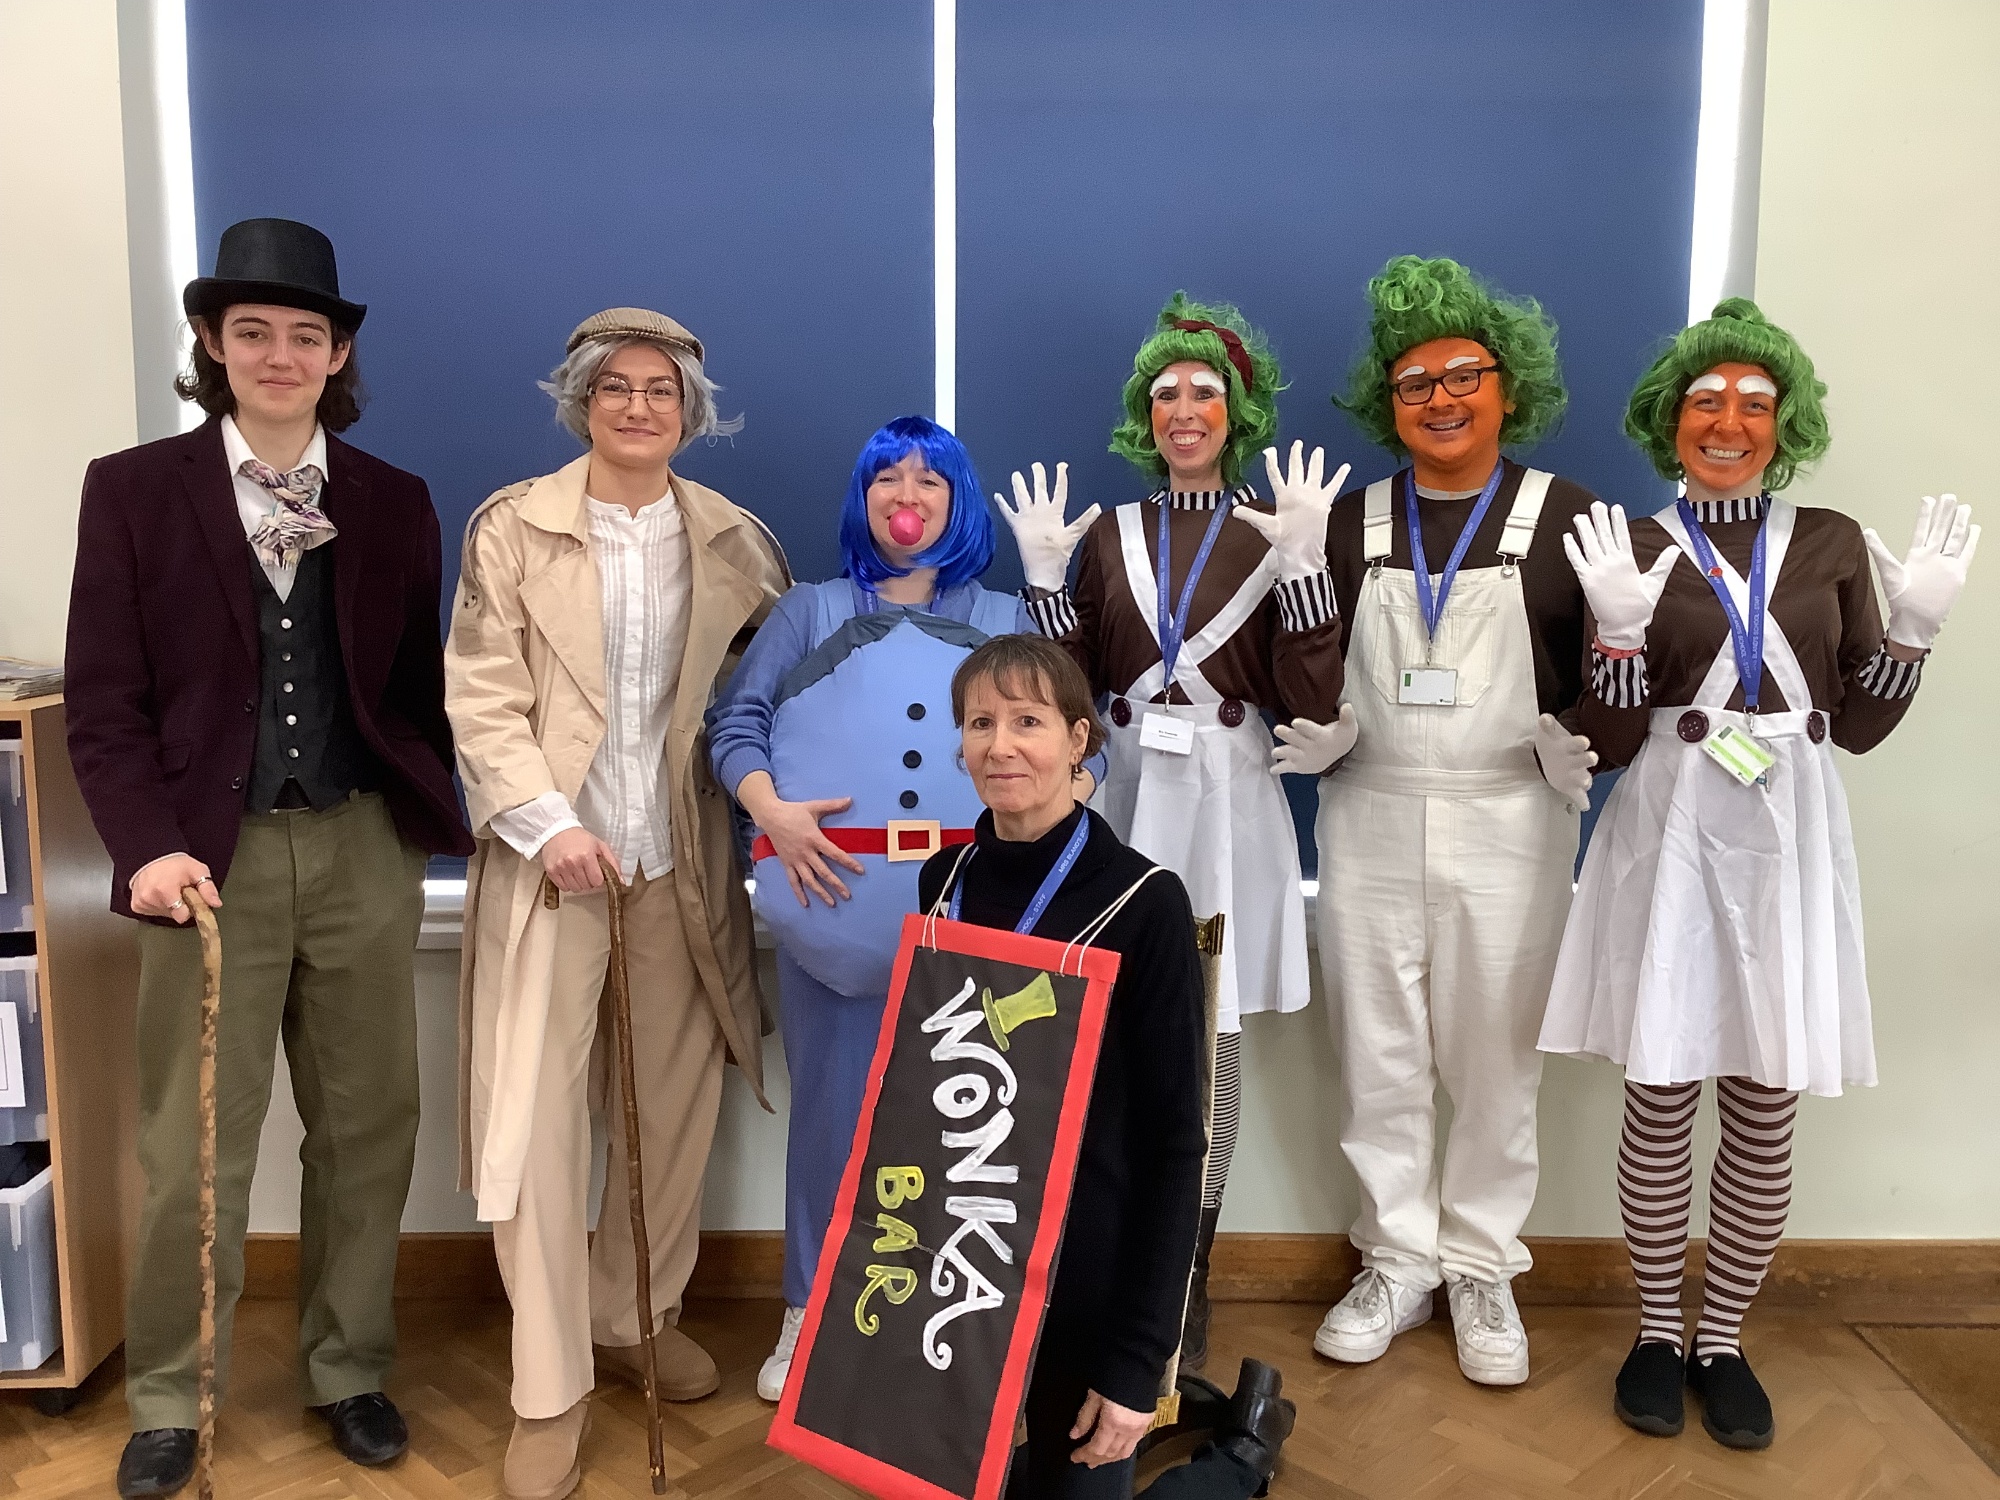 Staff dressing up as characters from Willy Wonka for World Book Day